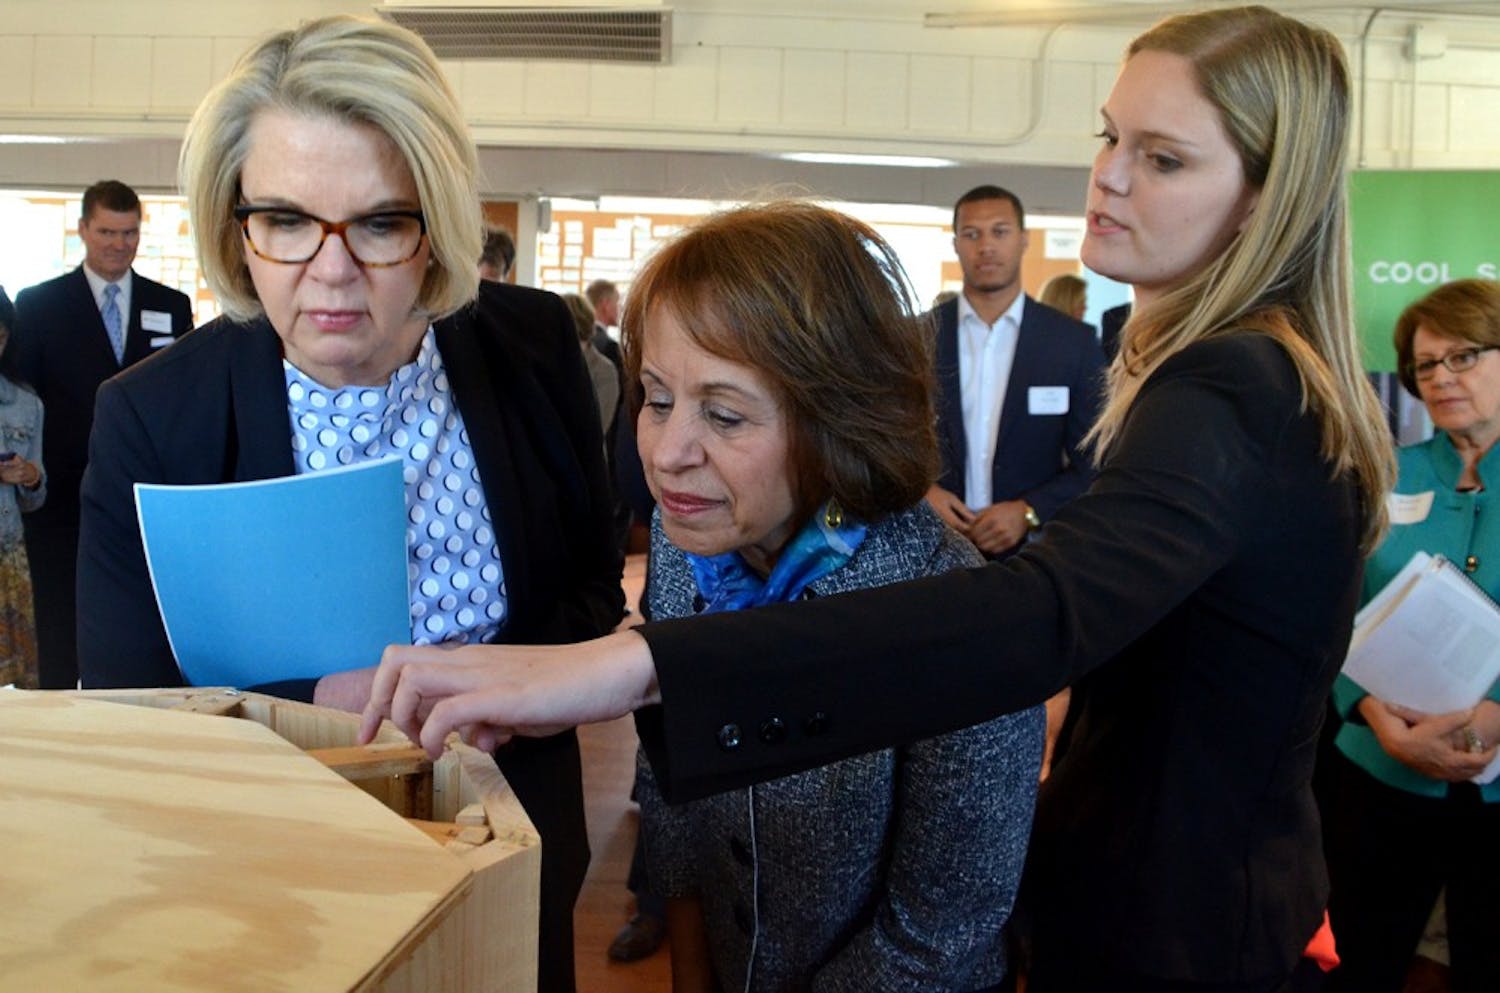 Alsey Davidson shows UNC System President Margaret Spellings and Chancellor Carol Folt how Honey Halo's beehive design can save the lives of honeybees.